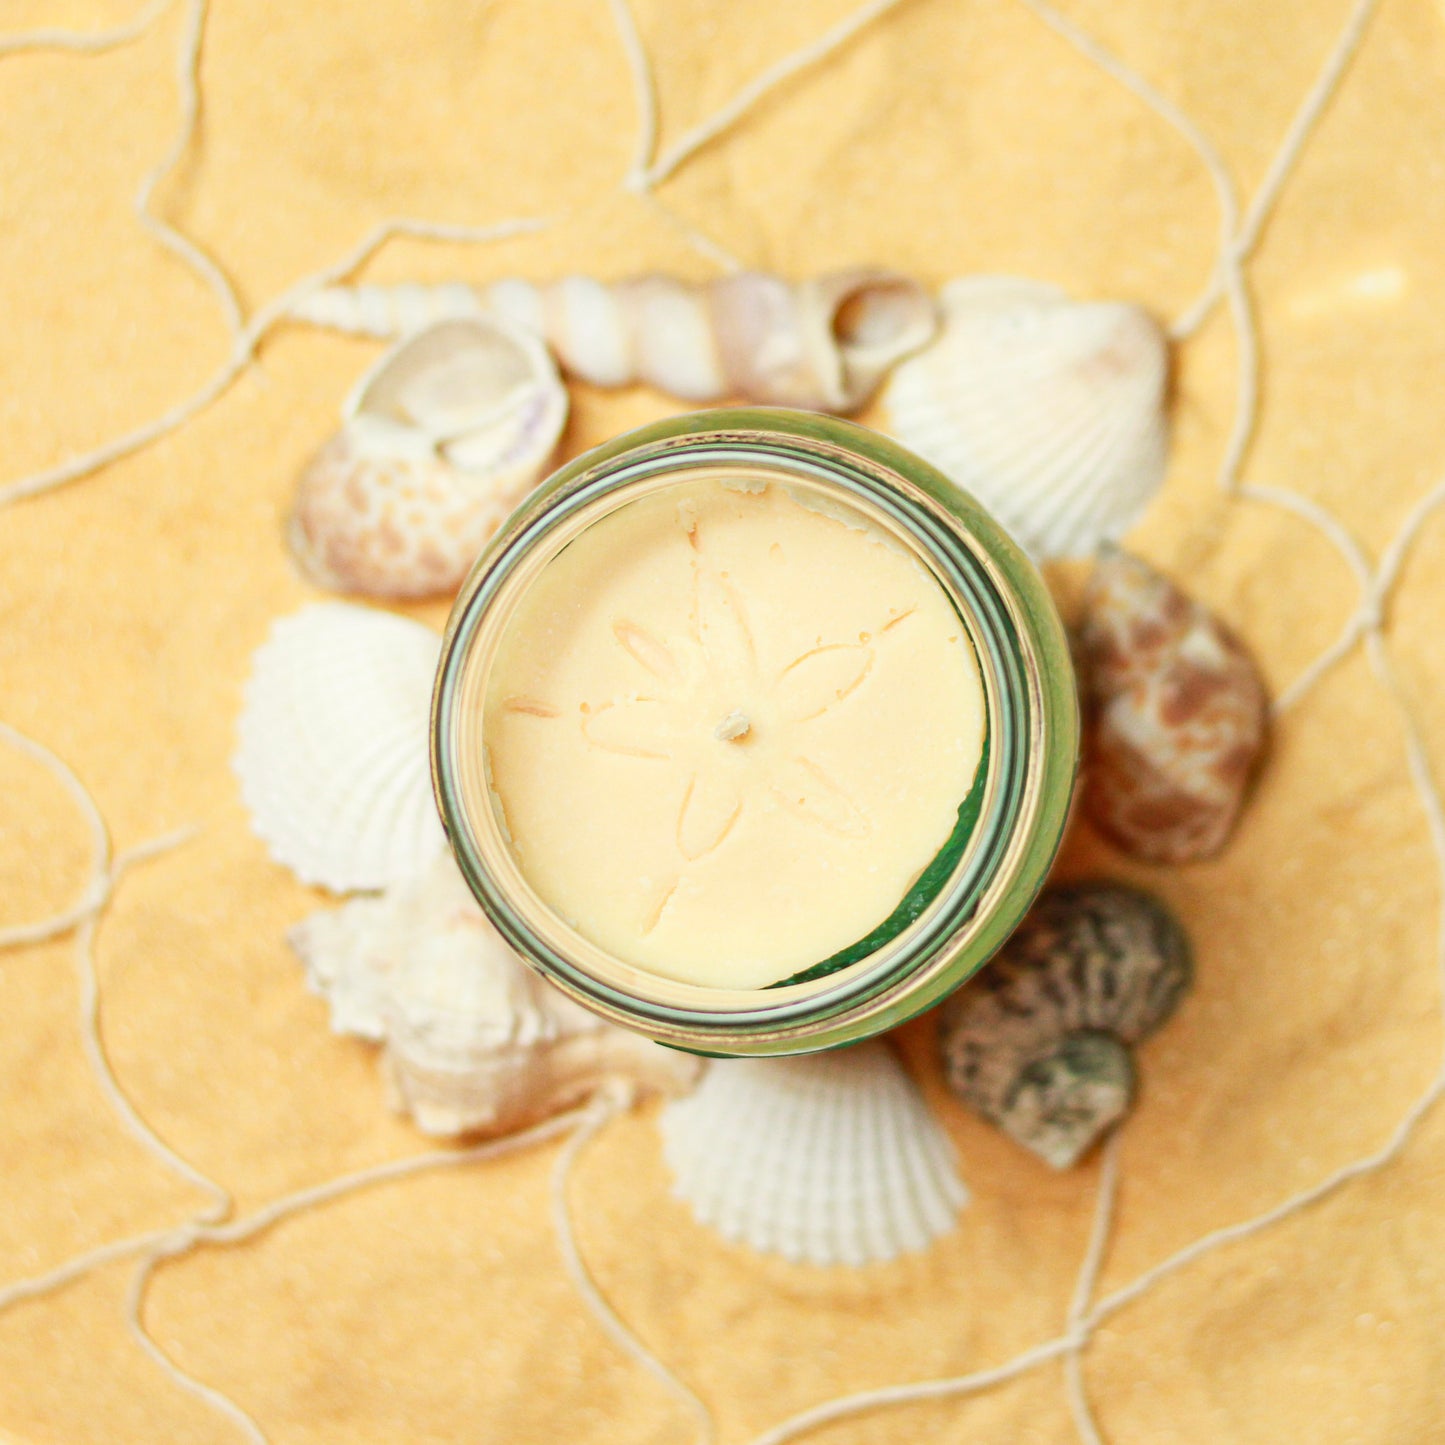 BEACH DAY CANDLE 12 OZ